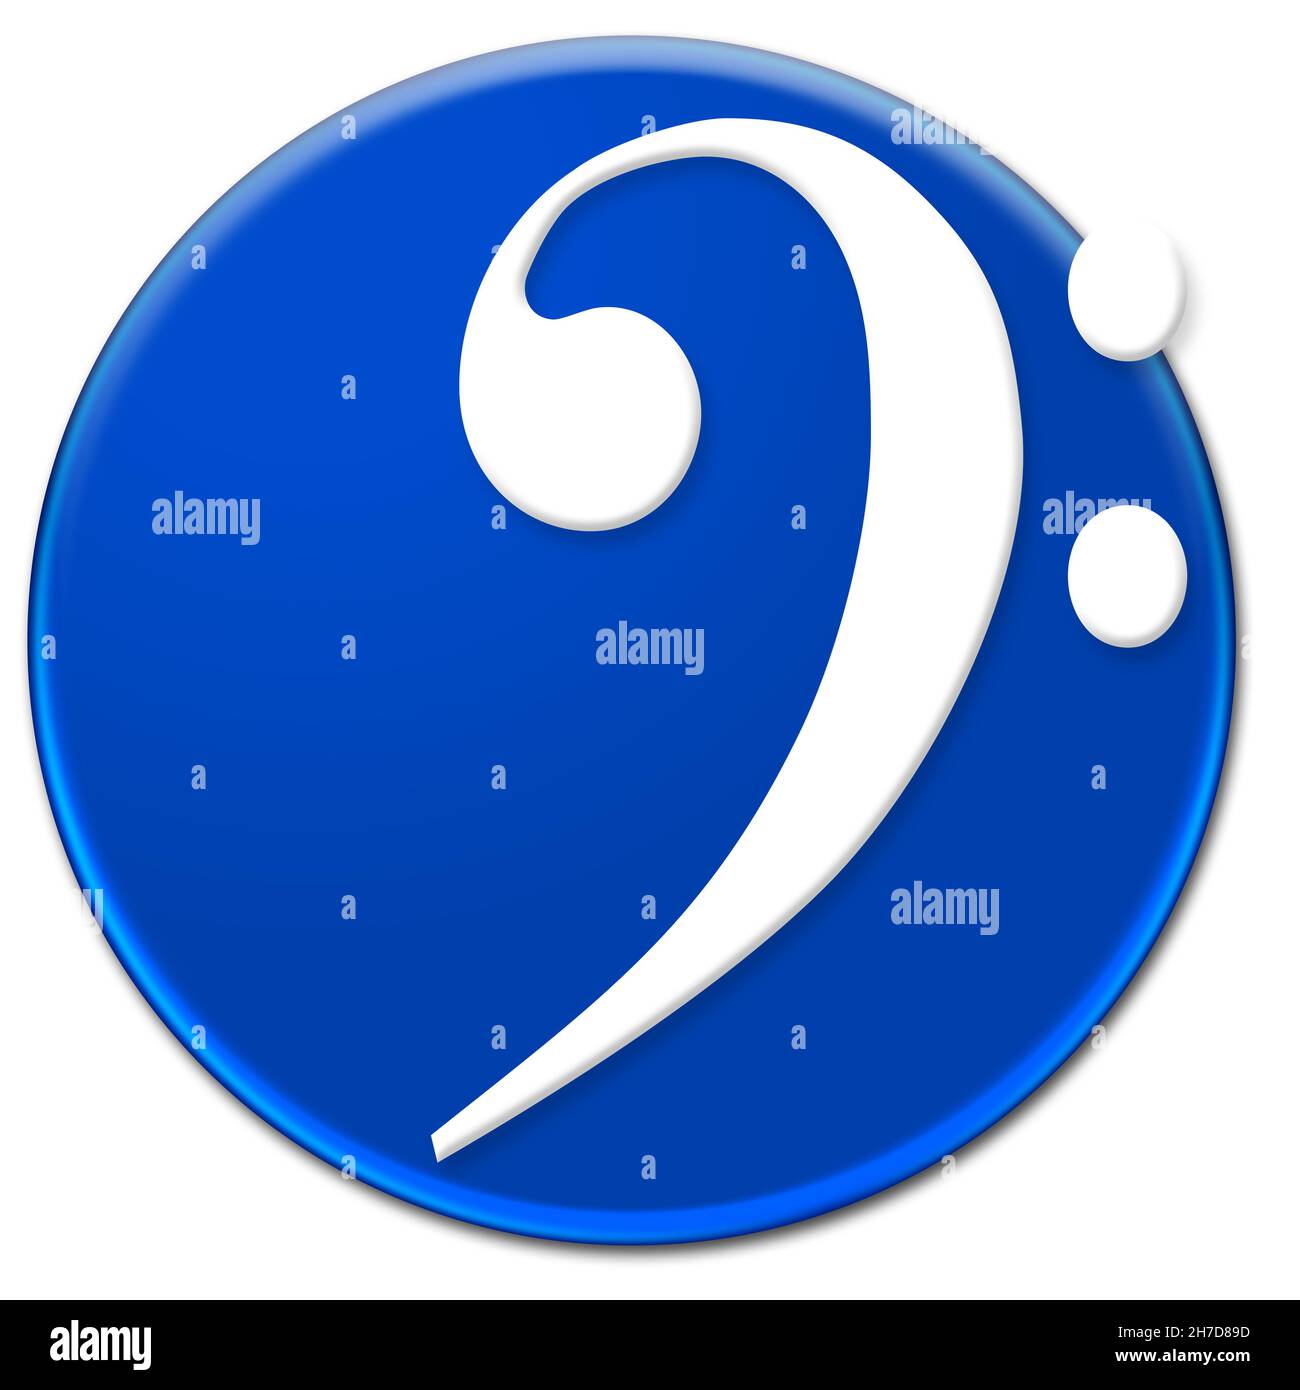 White bass clef sign on a blue glassy button isolated over white background Stock Photo